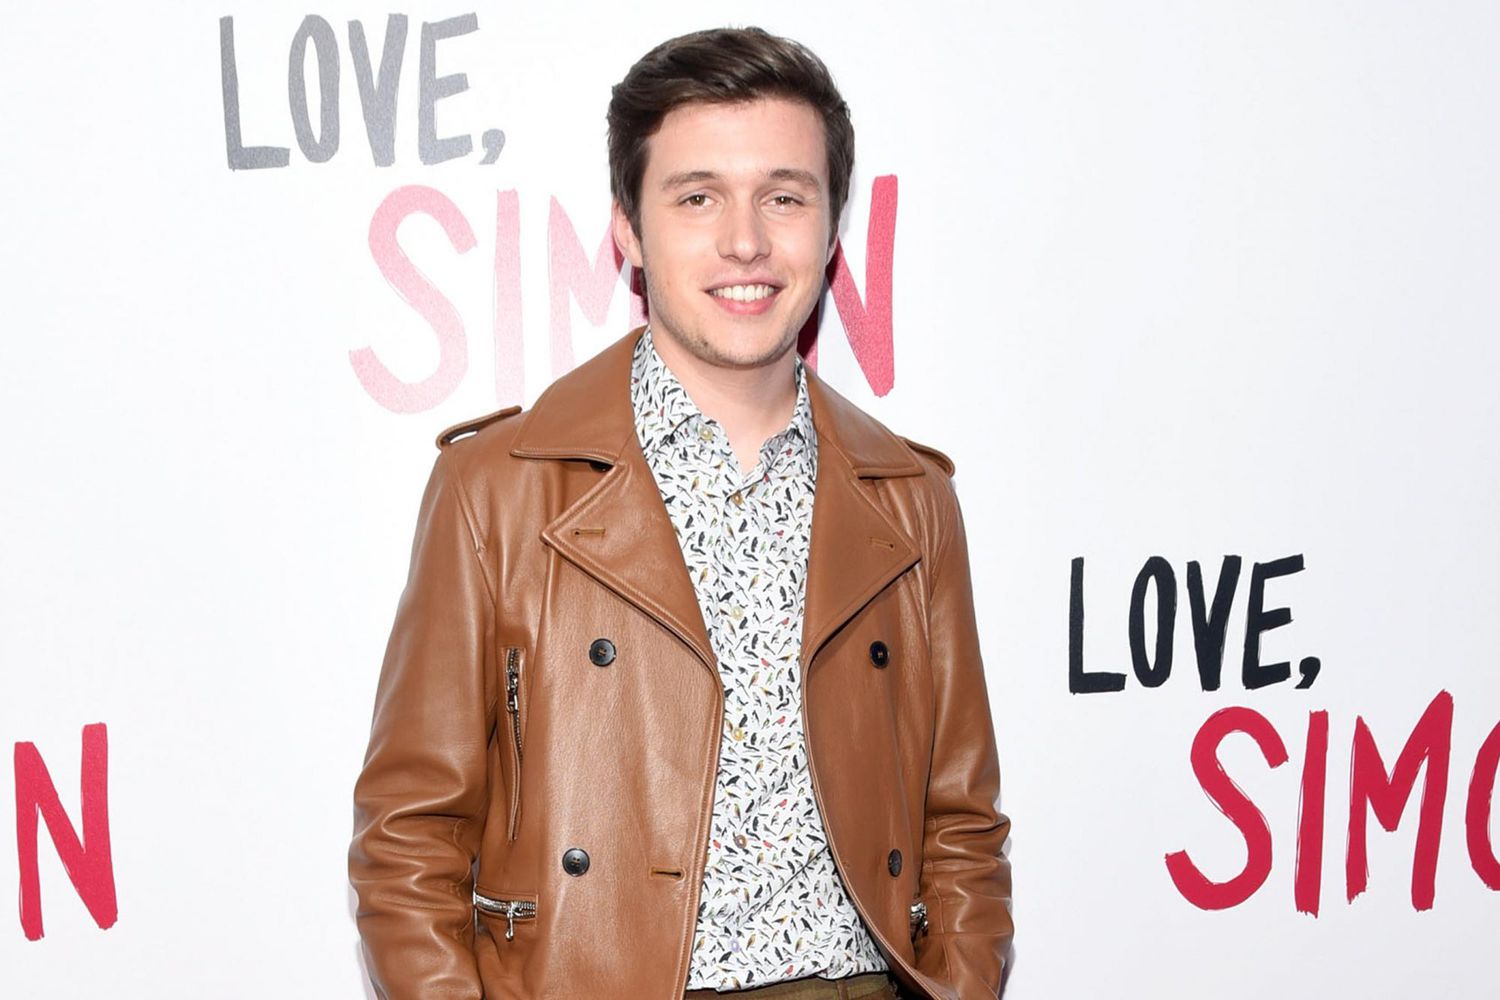 LOS ANGELES, CA - MARCH 13: Actor Nick Robinson attends a special screening of 20th Century Fox's "Love, Simon" at Westfield Century City on March 13, 2018 in Los Angeles, California. (Photo by Michael Tullberg/Getty Images)